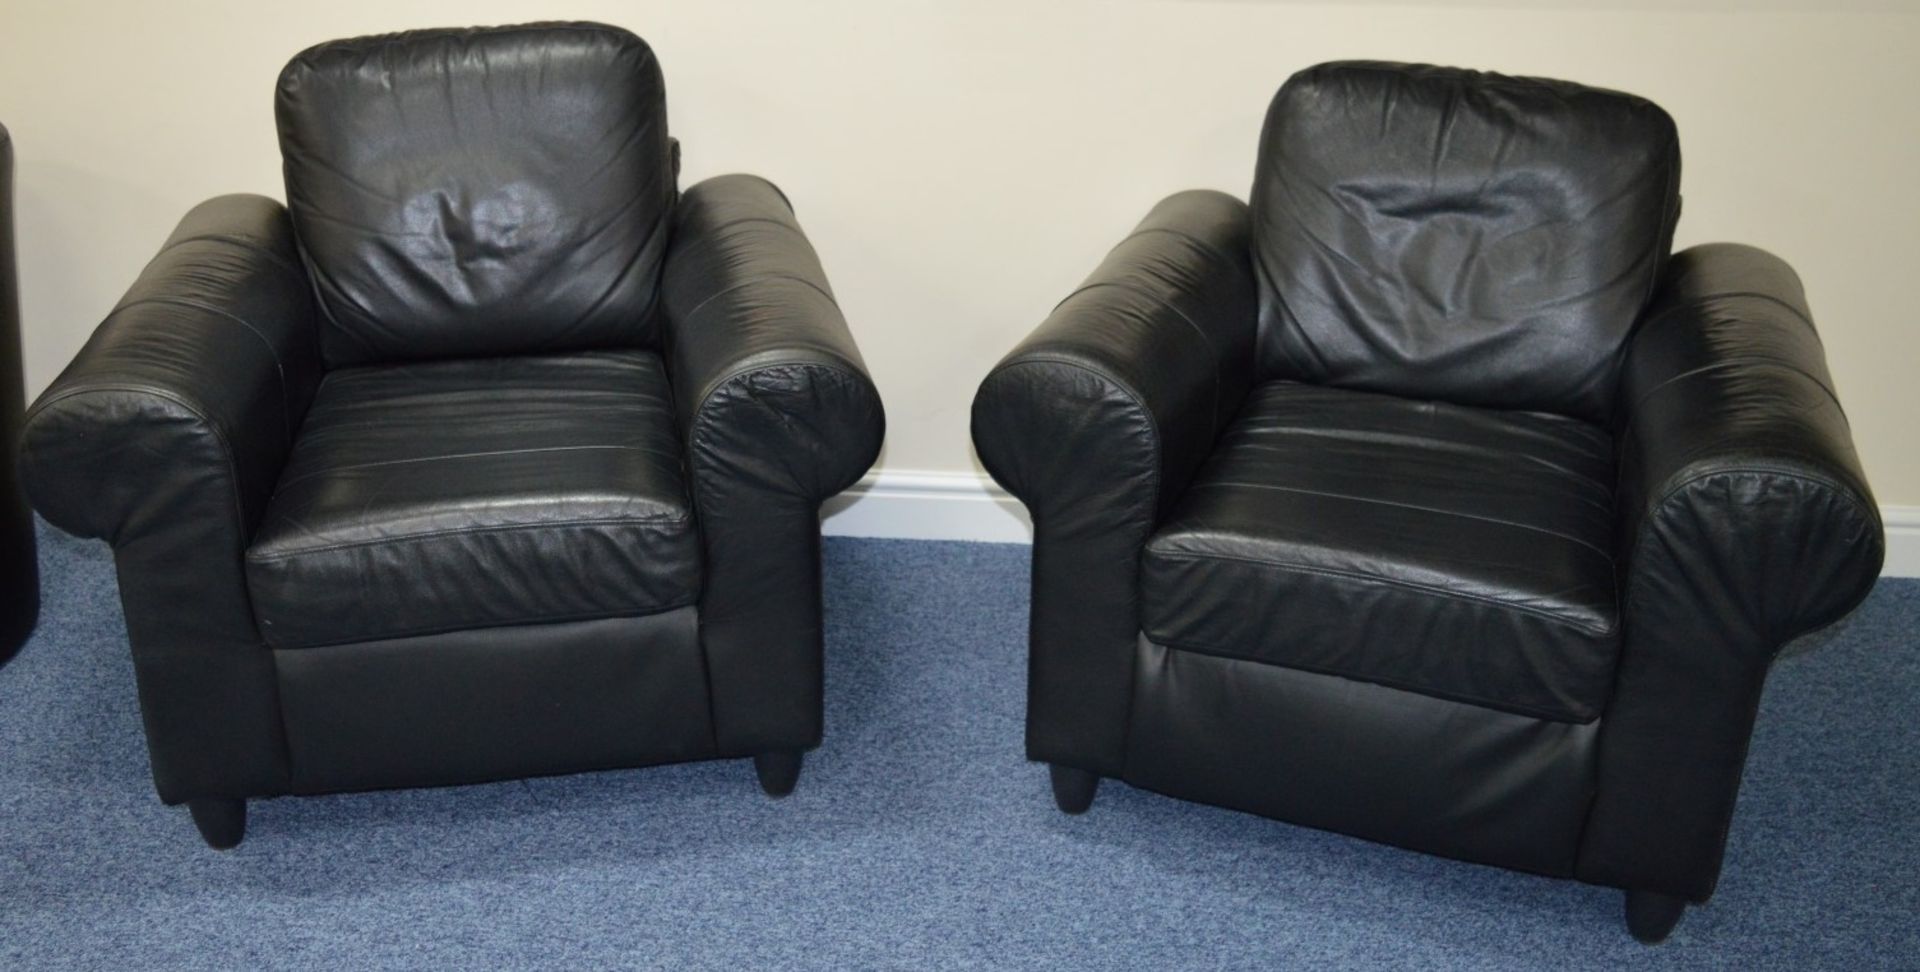 2 x Black Leather Armchairs - Contemporary Voluptuous Chairs in Black Leather - H85 x W94 x D86 - Image 5 of 5